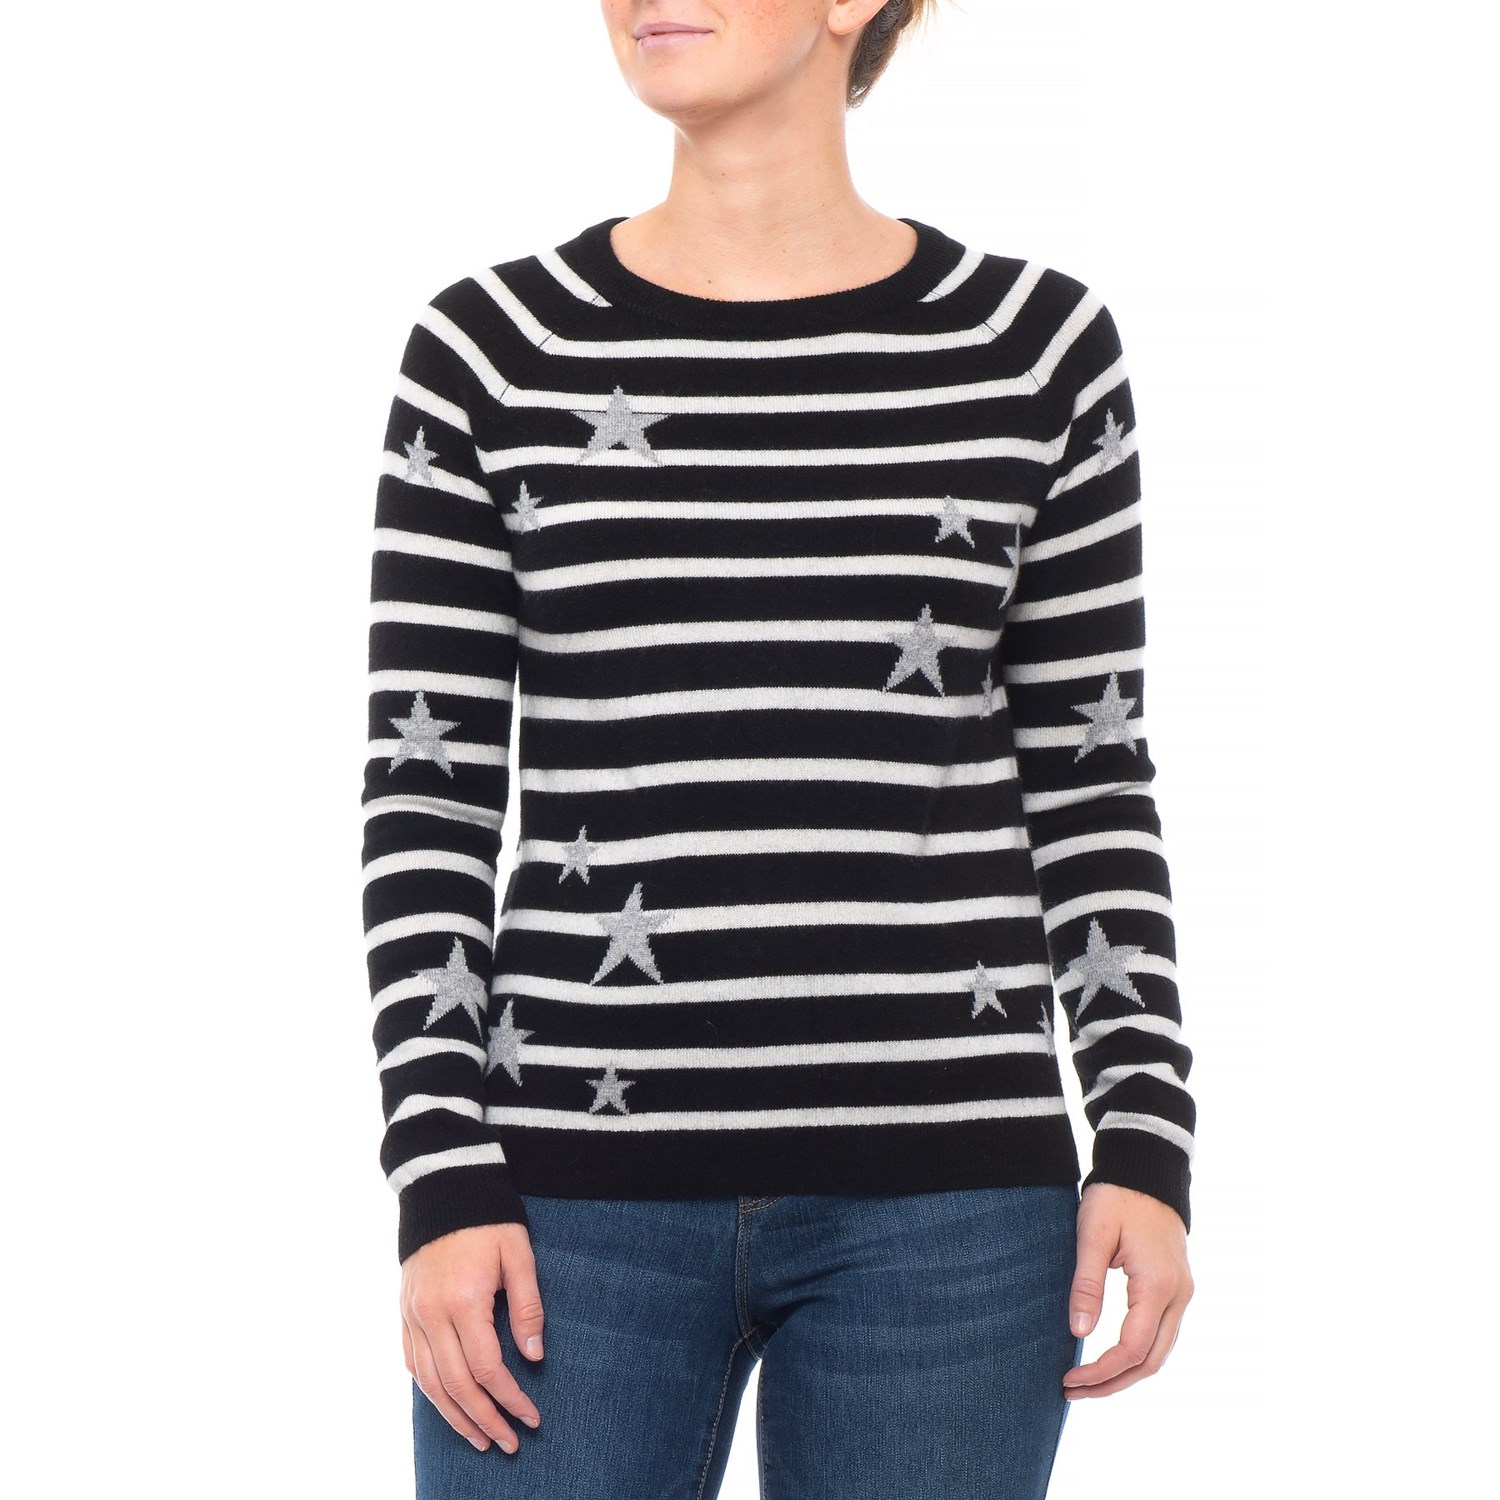 Philosophy Stripe Scattered Star Sweater – Cashmere (For Women)